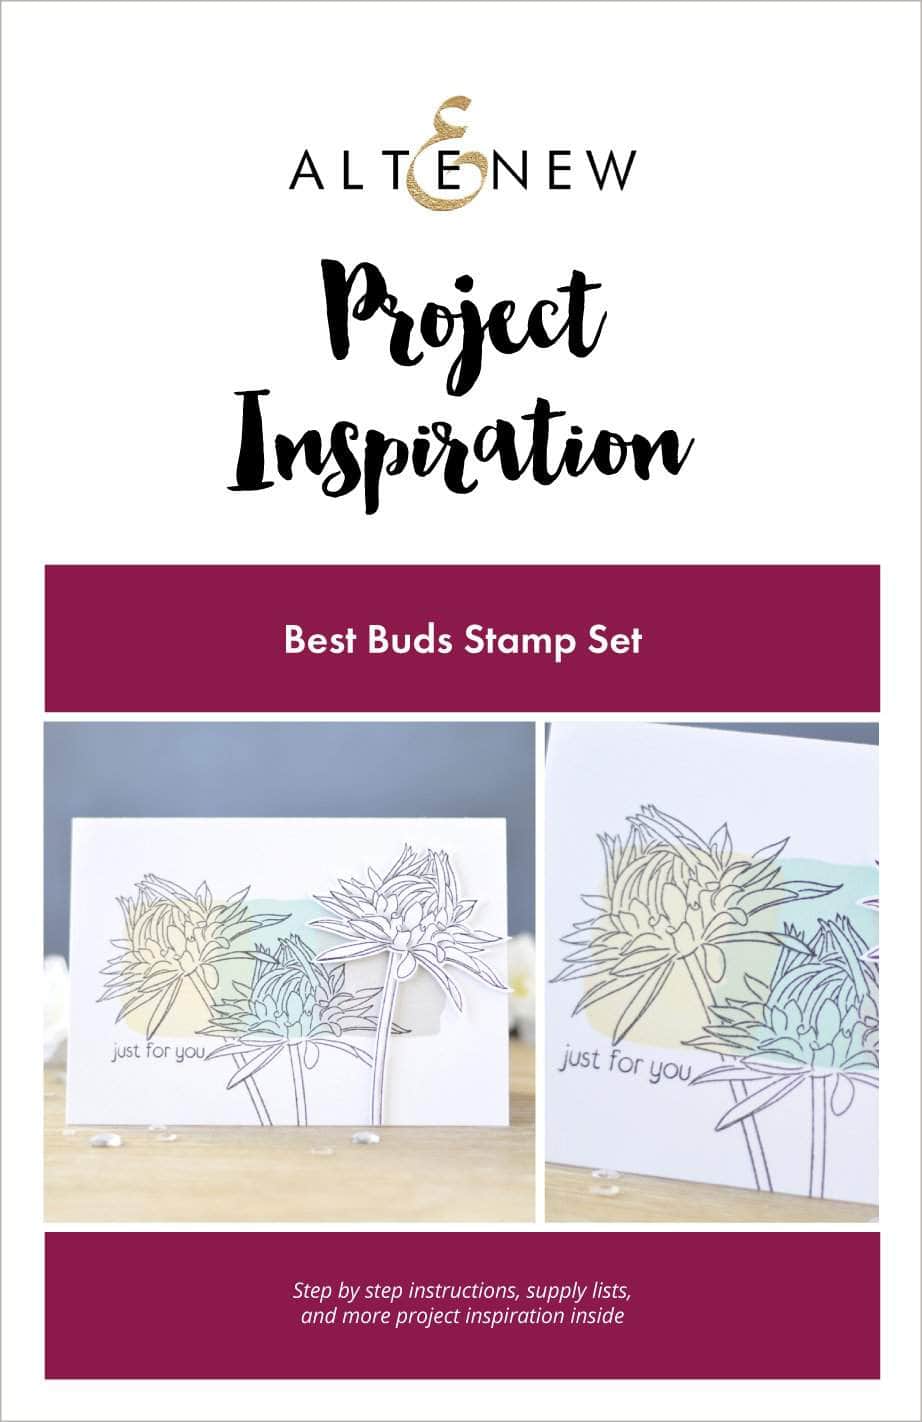 Printed Media Best Buds Project Inspiration Guide